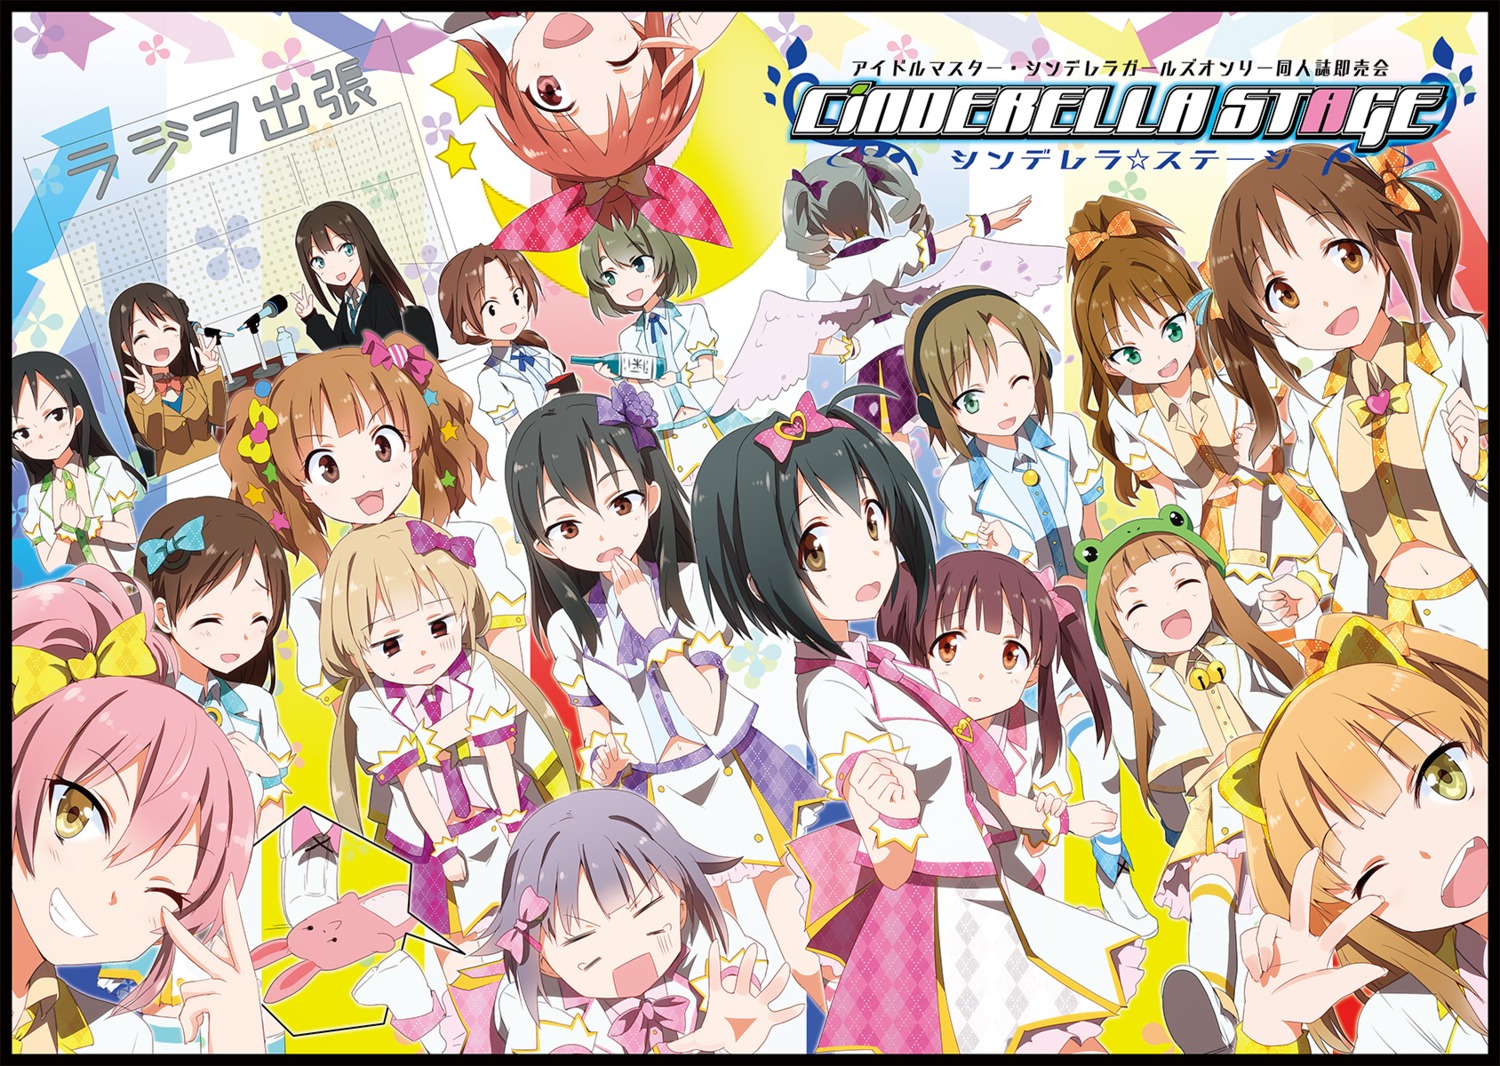 Gochou Comedia80 The Idolm Ster The Idolm Ster